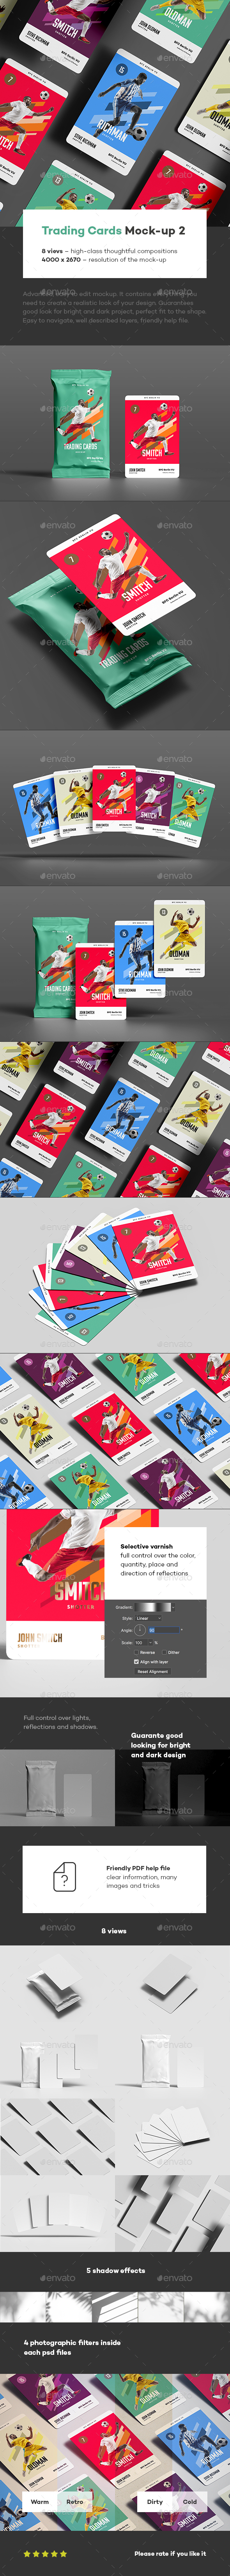 Trading Cards Mock-up 2